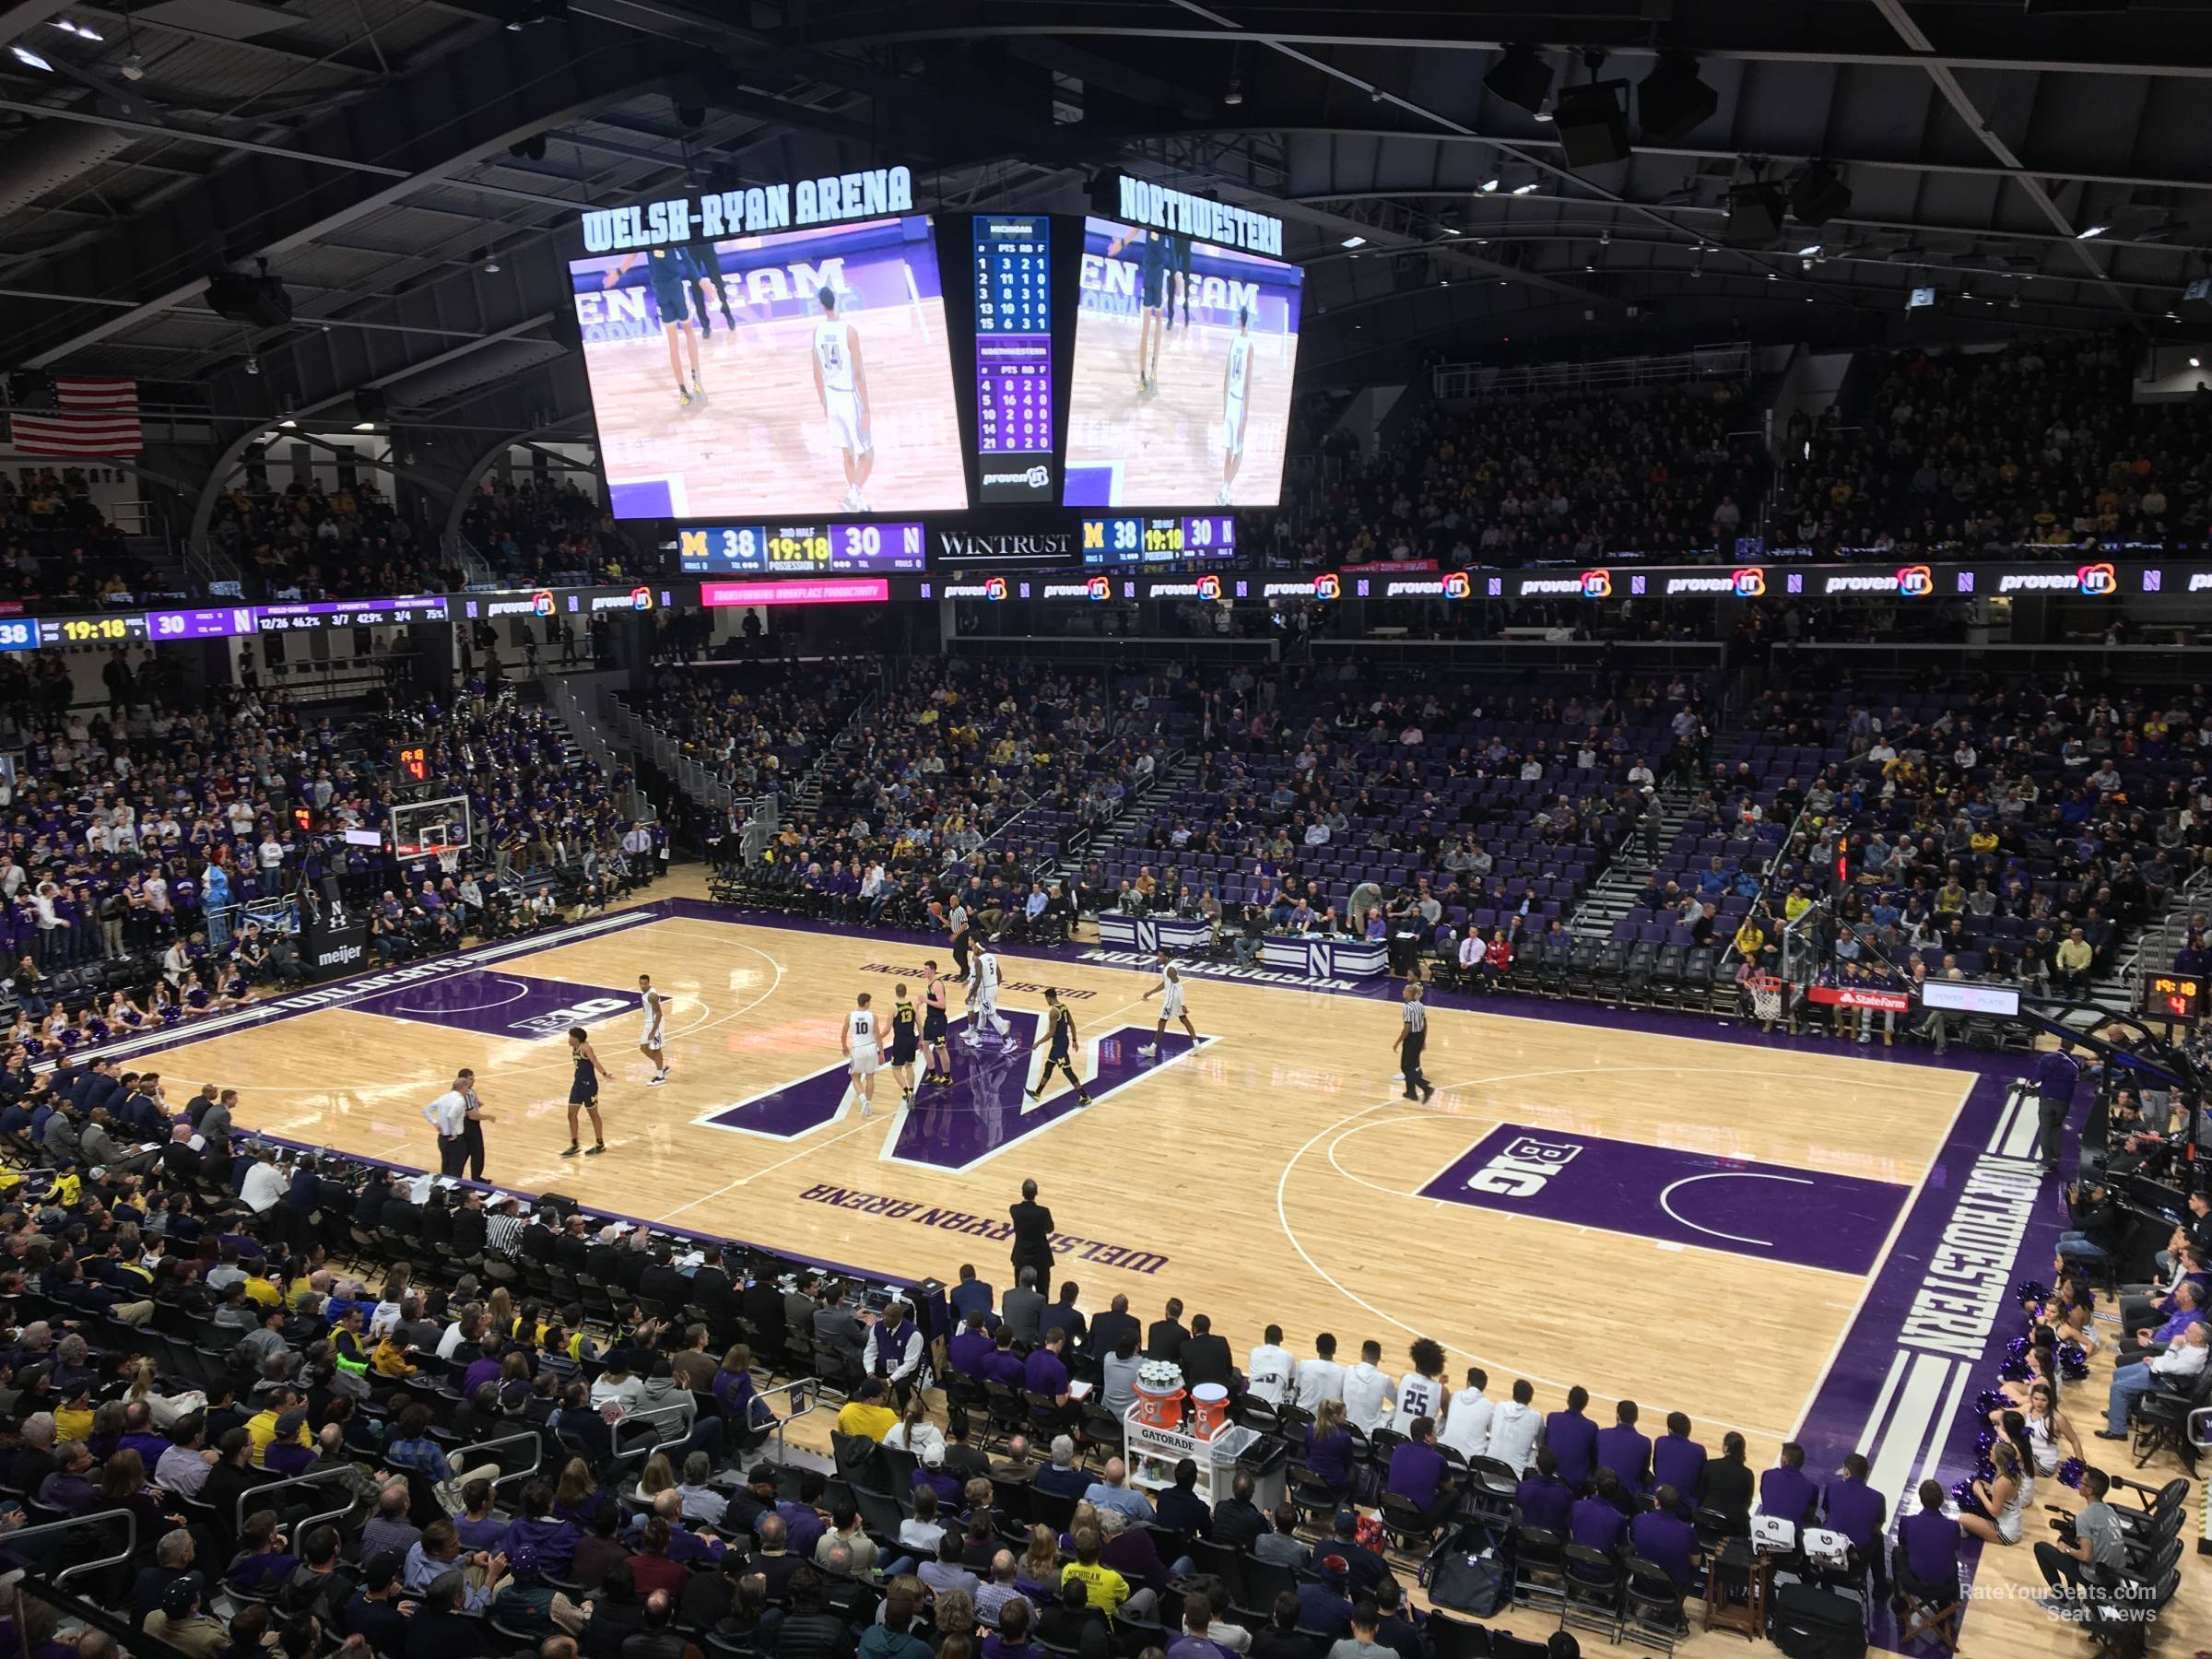 section 207, row 1 seat view  - welsh-ryan arena